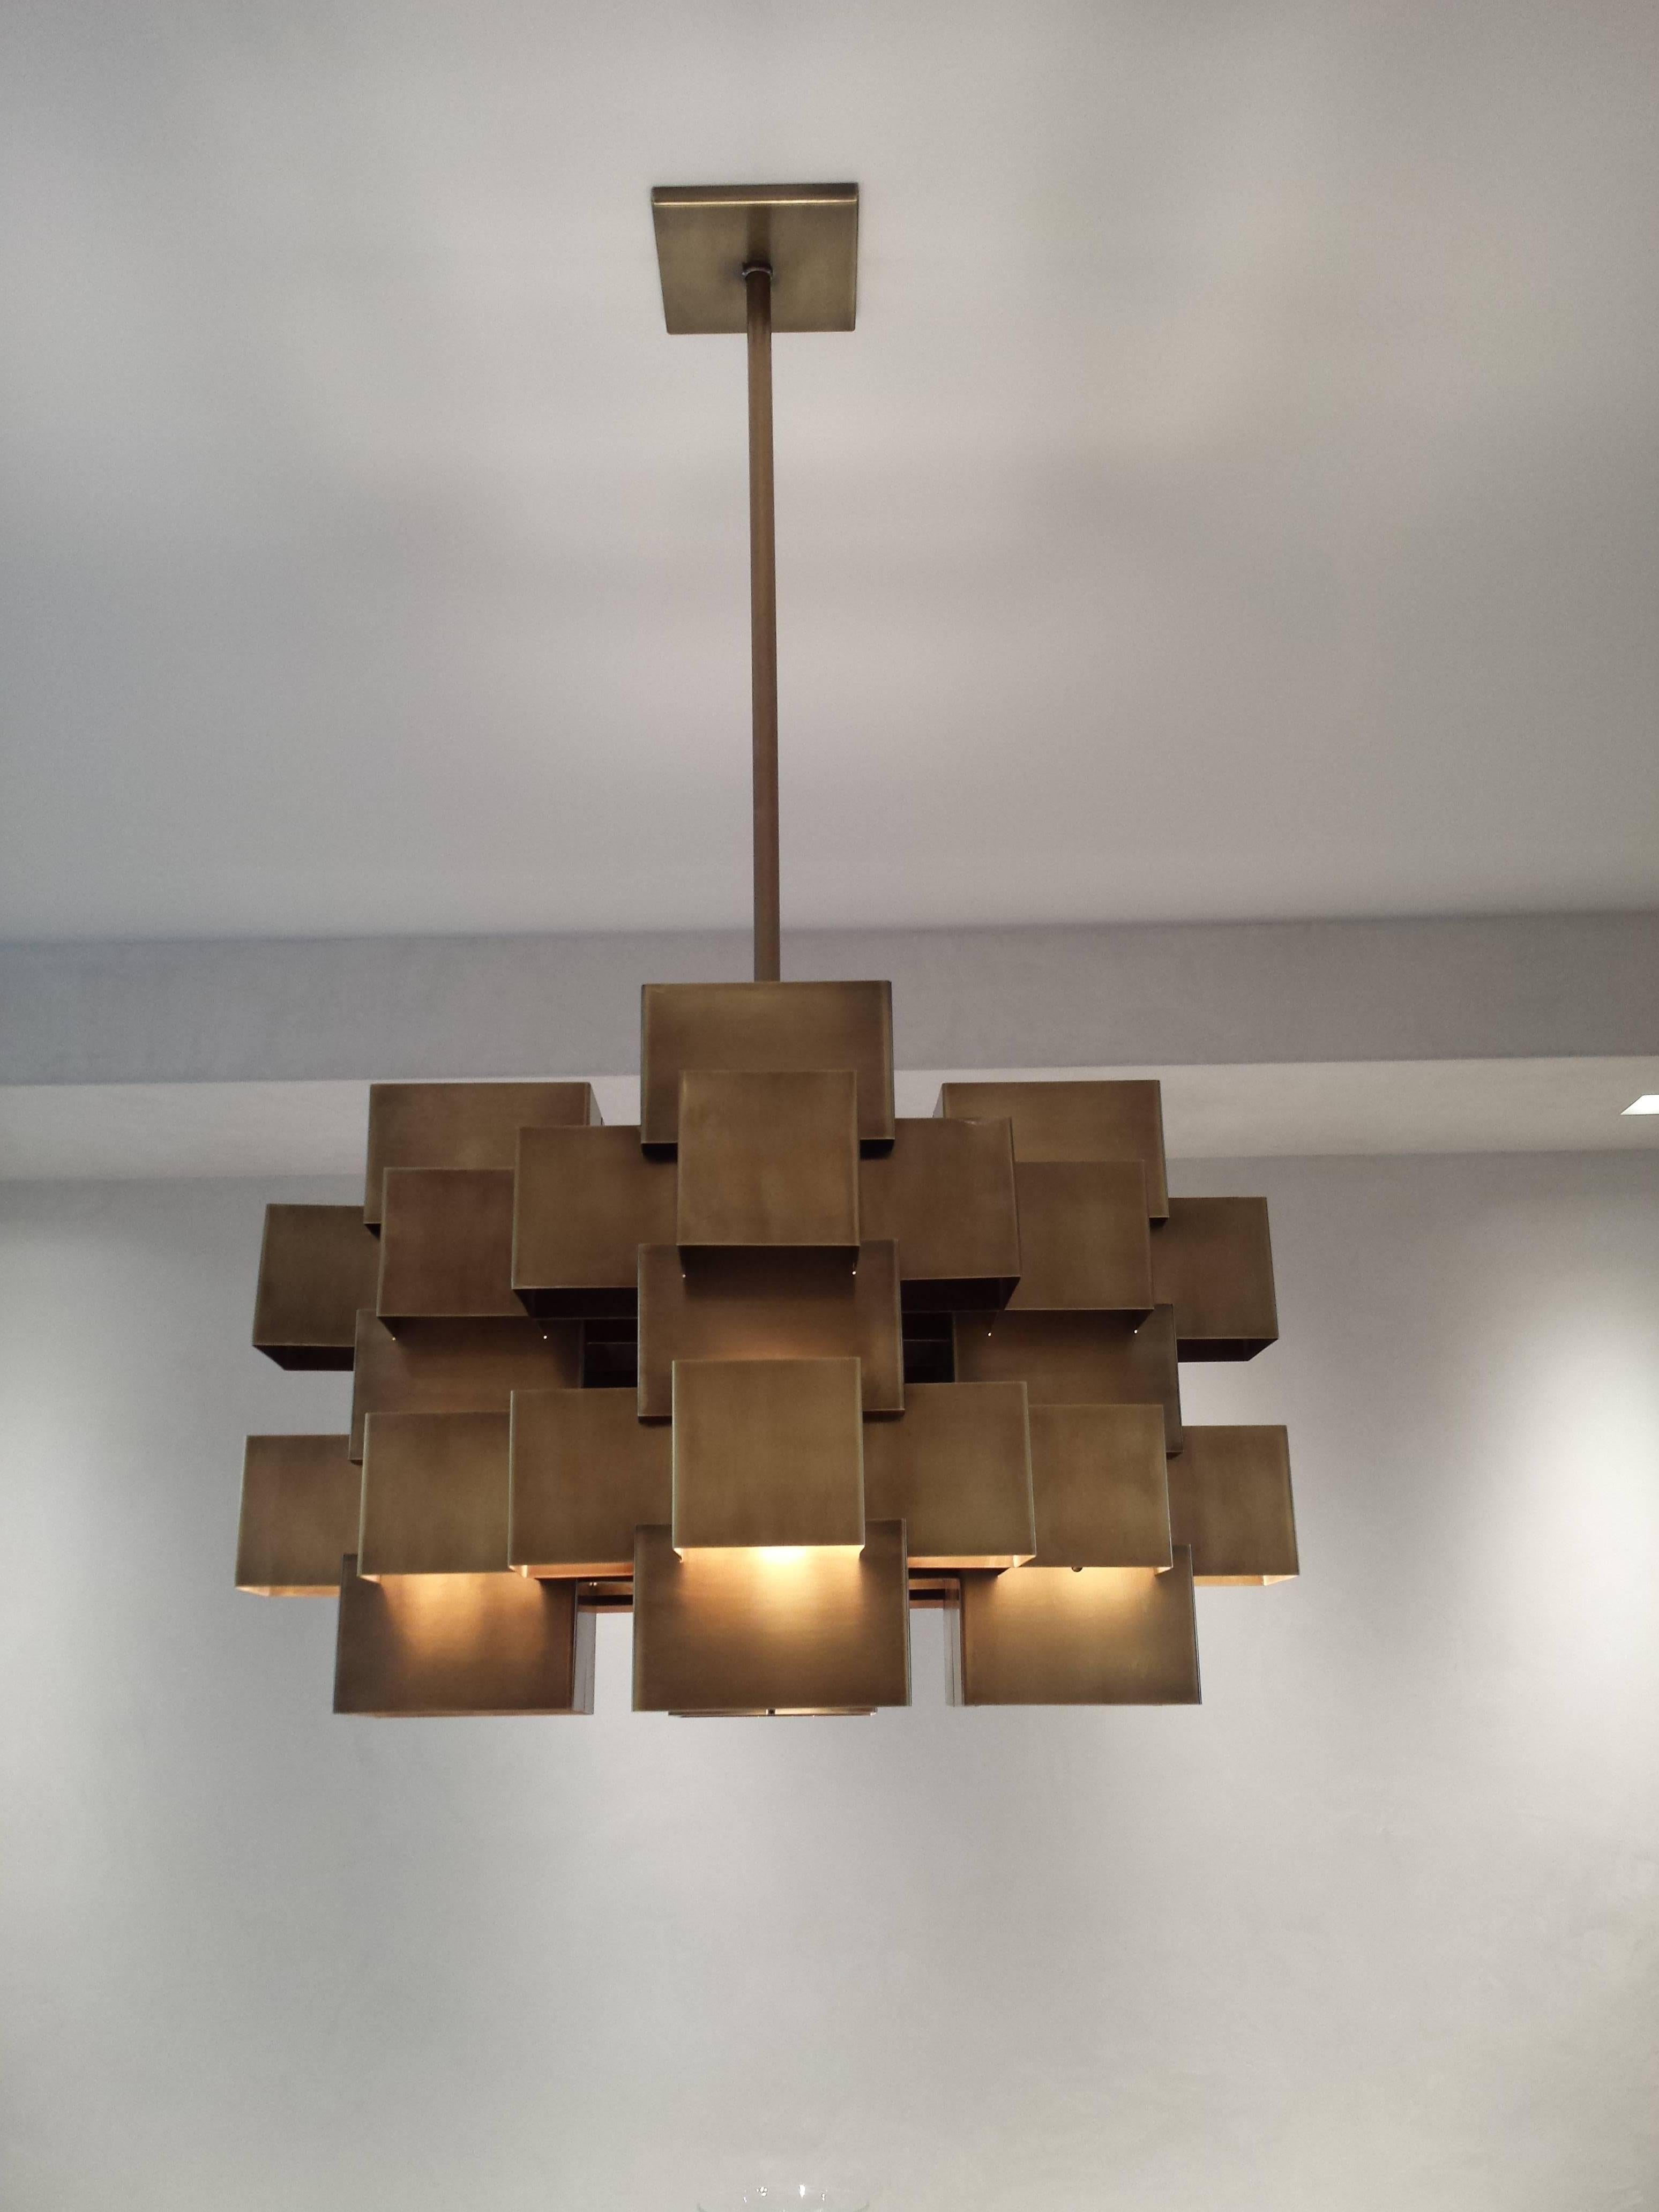 A very elegant and solid cubist chandelier in the manner of Curtis Jere.
Antique brass - 26